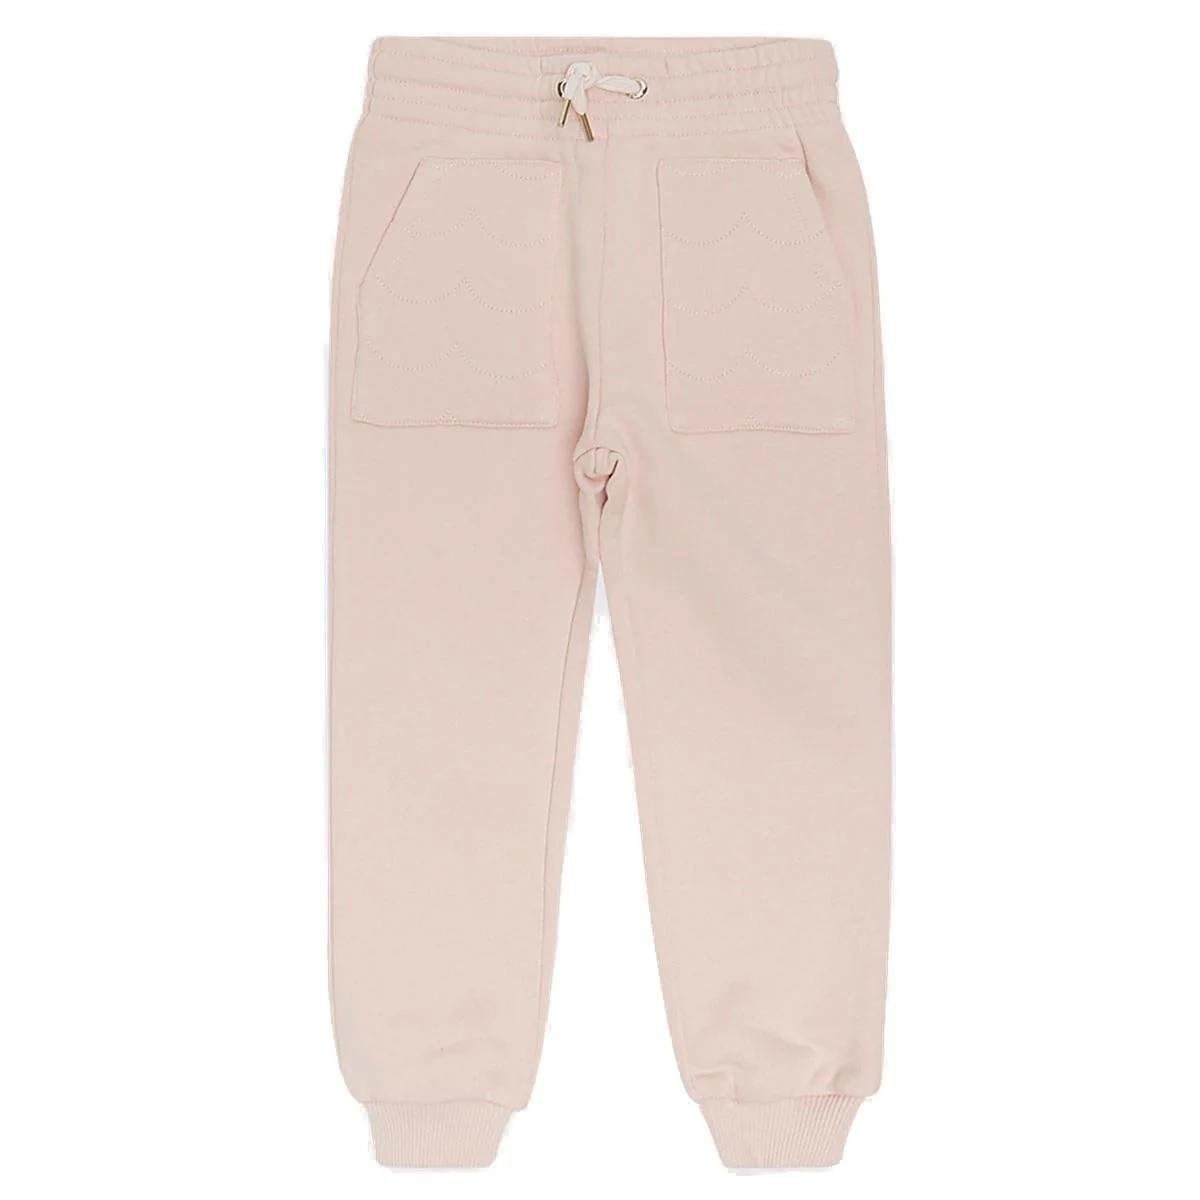 Chloe Girls Washed Pink Cotton Scallop Embroidery Joggers by CHLOE